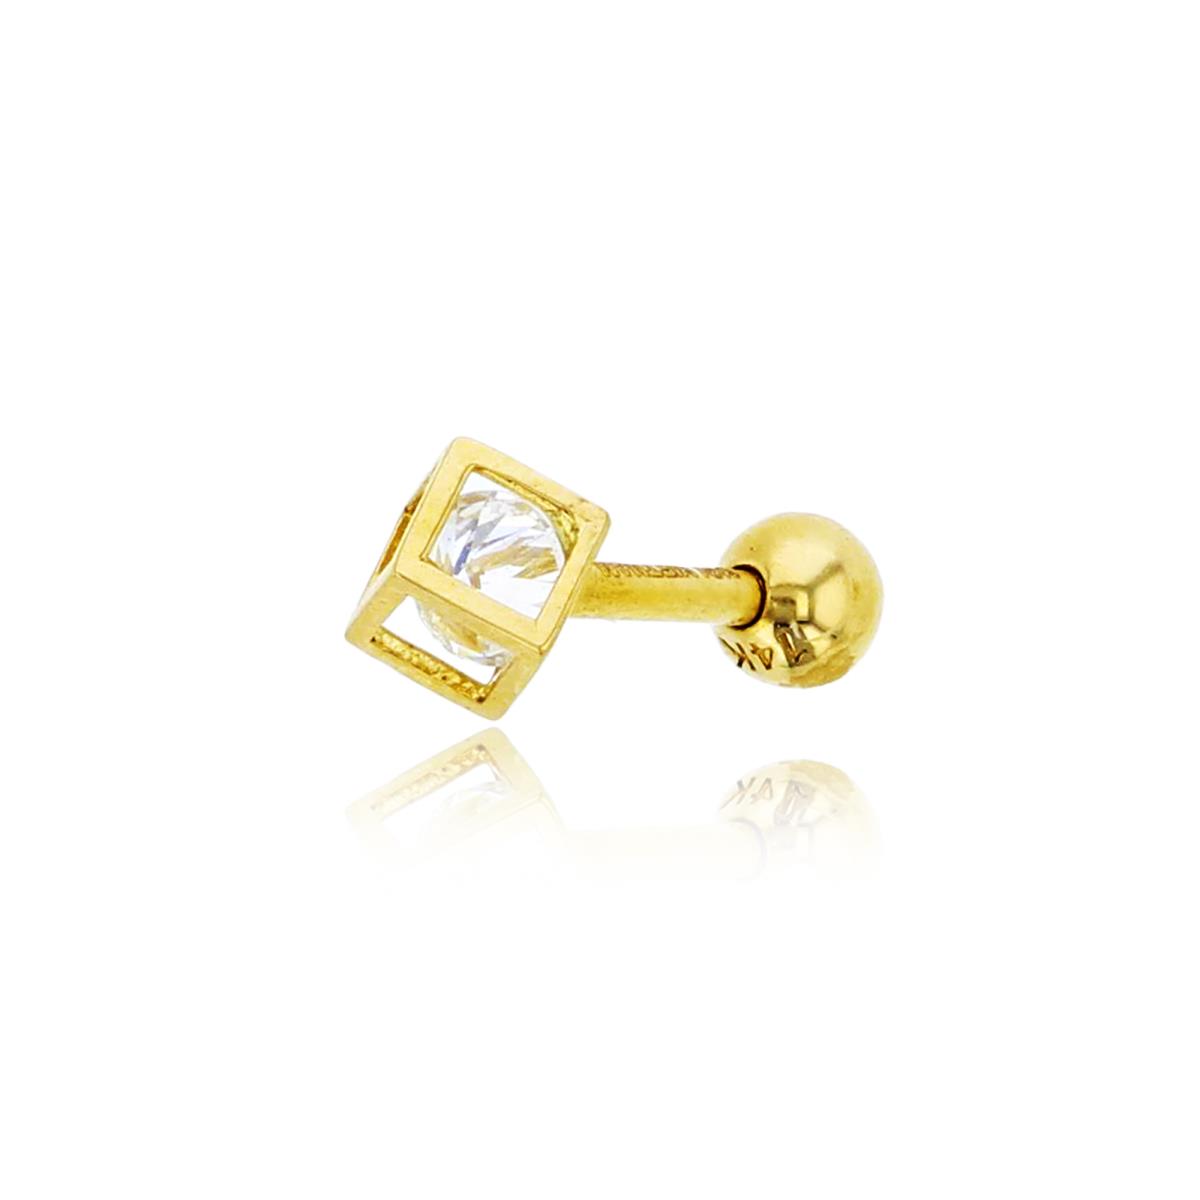 14K Yellow Gold 3mm Round Cut CZ Cube Nose Stud with Ball Screw-Back